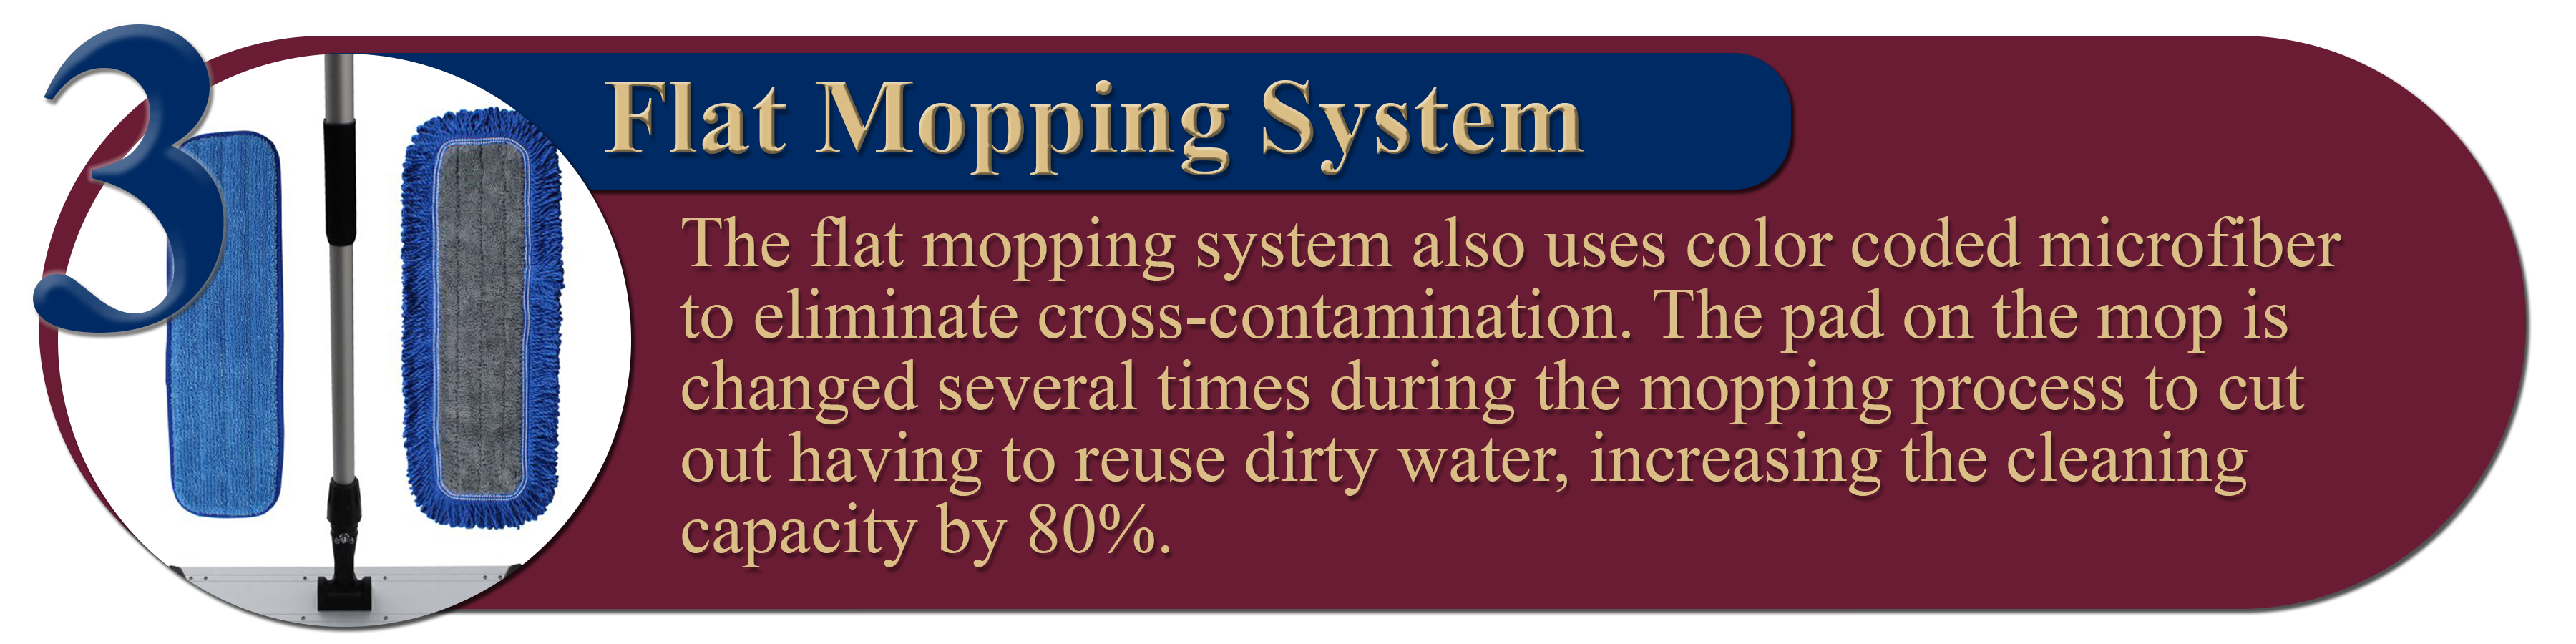 3. Flat Mopping System: The flat mopping system also uses color coded microfiber to eliminate cross-contamination. The pad on the mop is changed several times during the mopping process to cut out having to reuse dirty water, increasing the cleaning capacity by 80%.